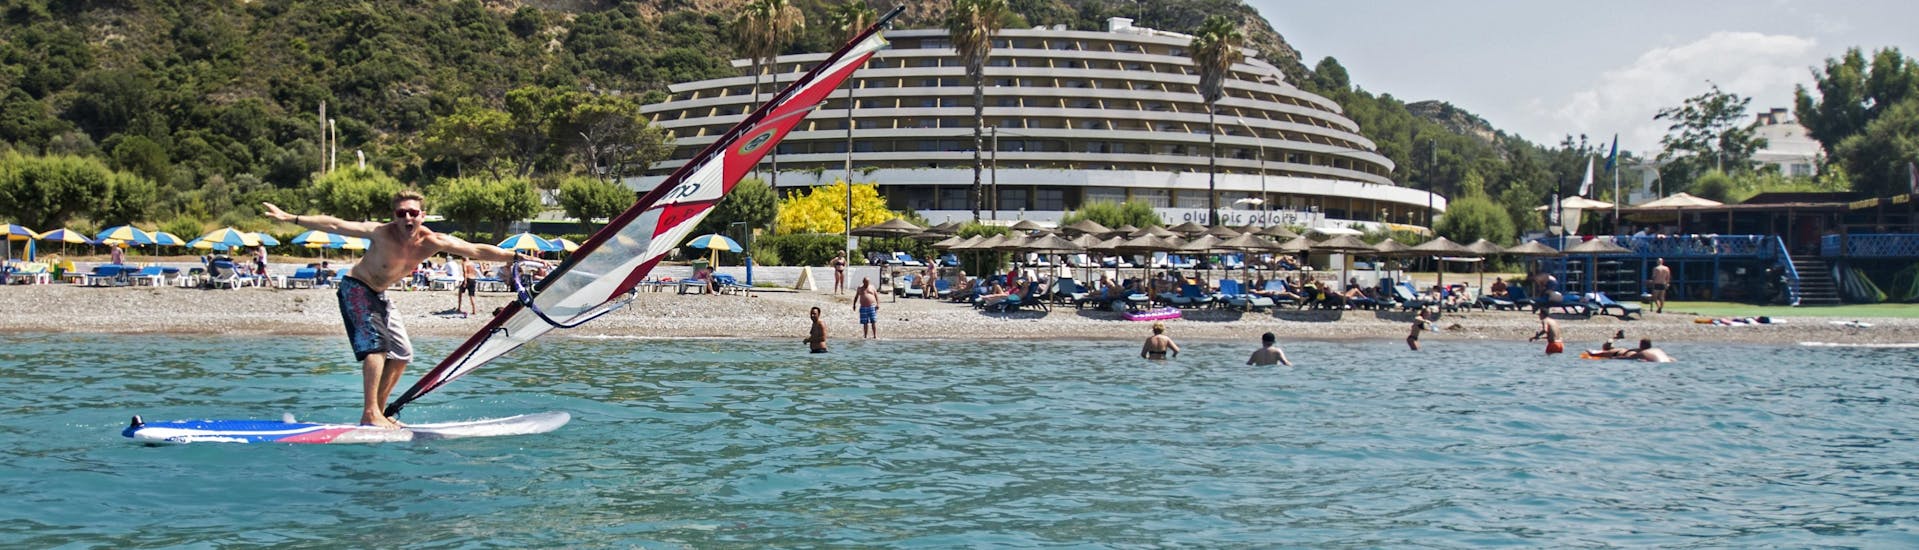 Windsurfing Lessons for Kids & Adults - Beginners with Windsurfers' World Rhodes.